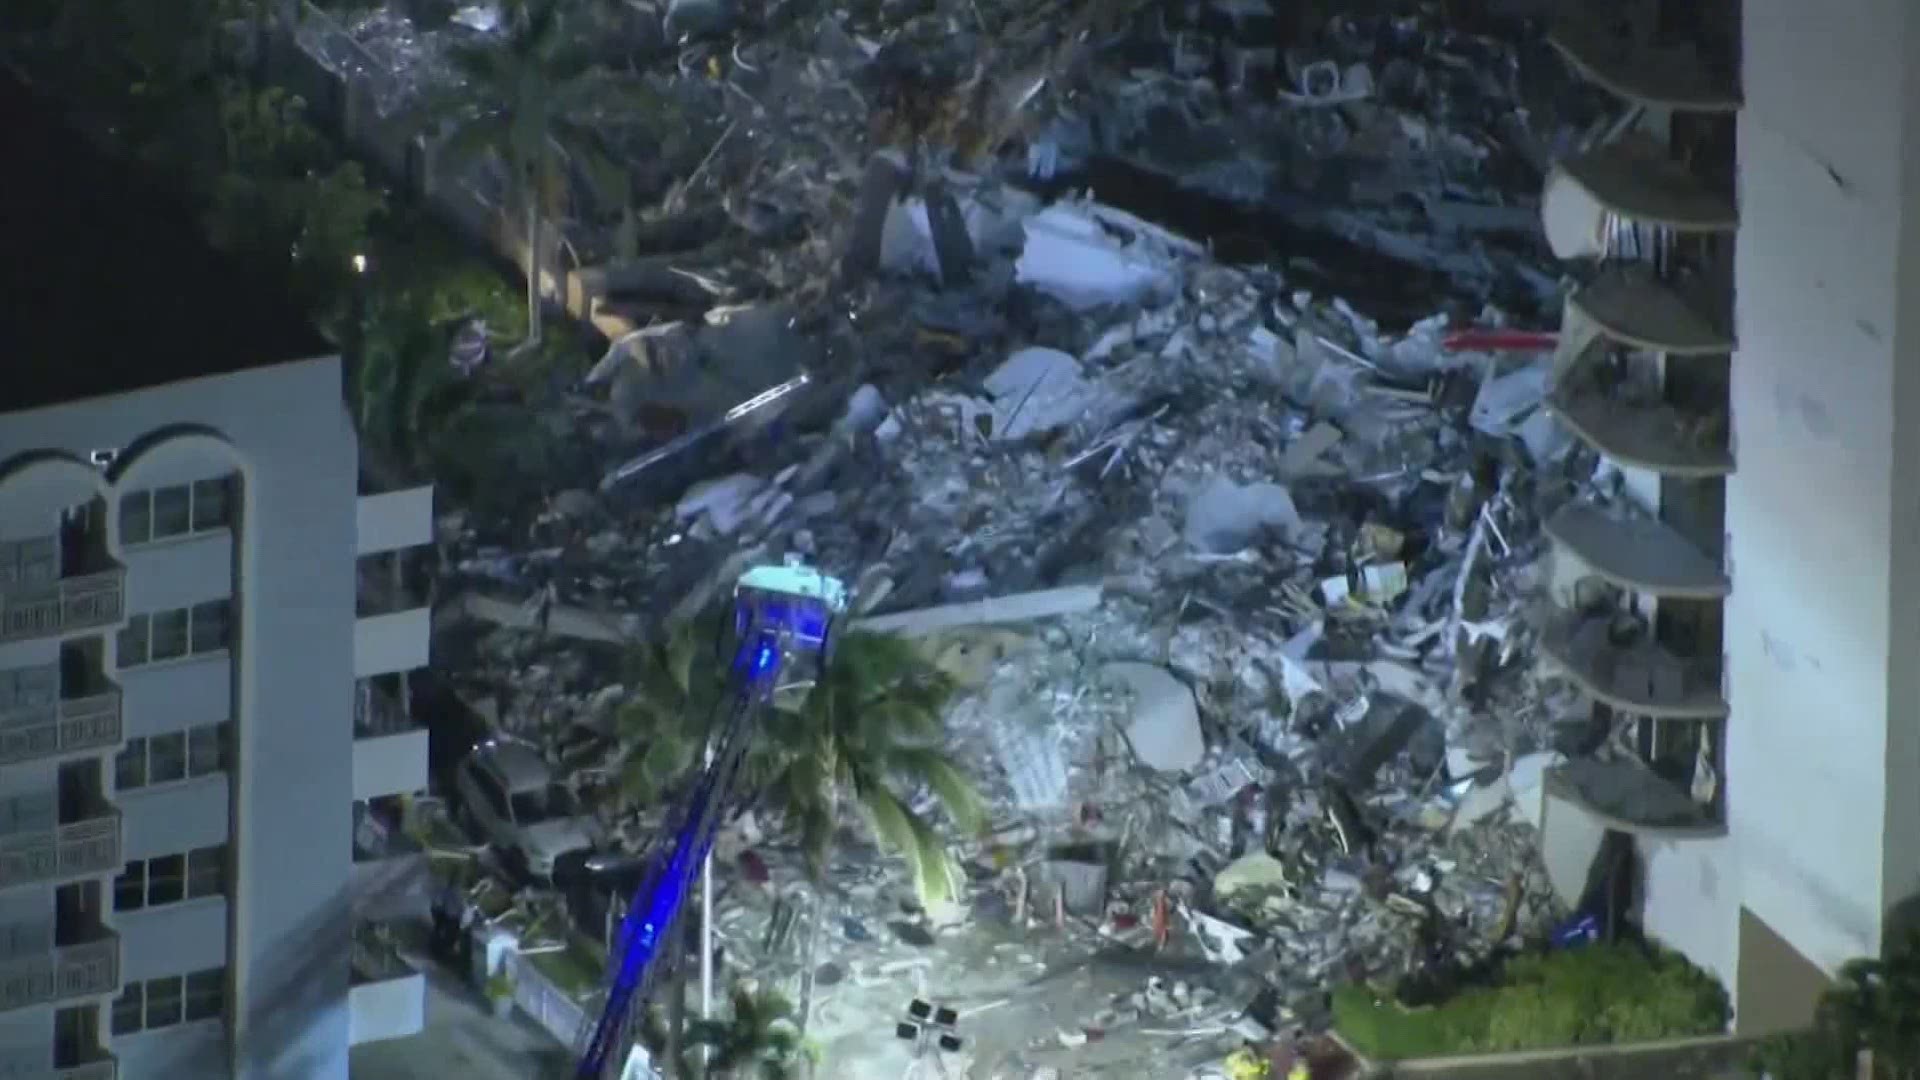 A high-rise building partially collapsed early Thursday morning in South Florida, killing at least one person. Many more are feared dead.